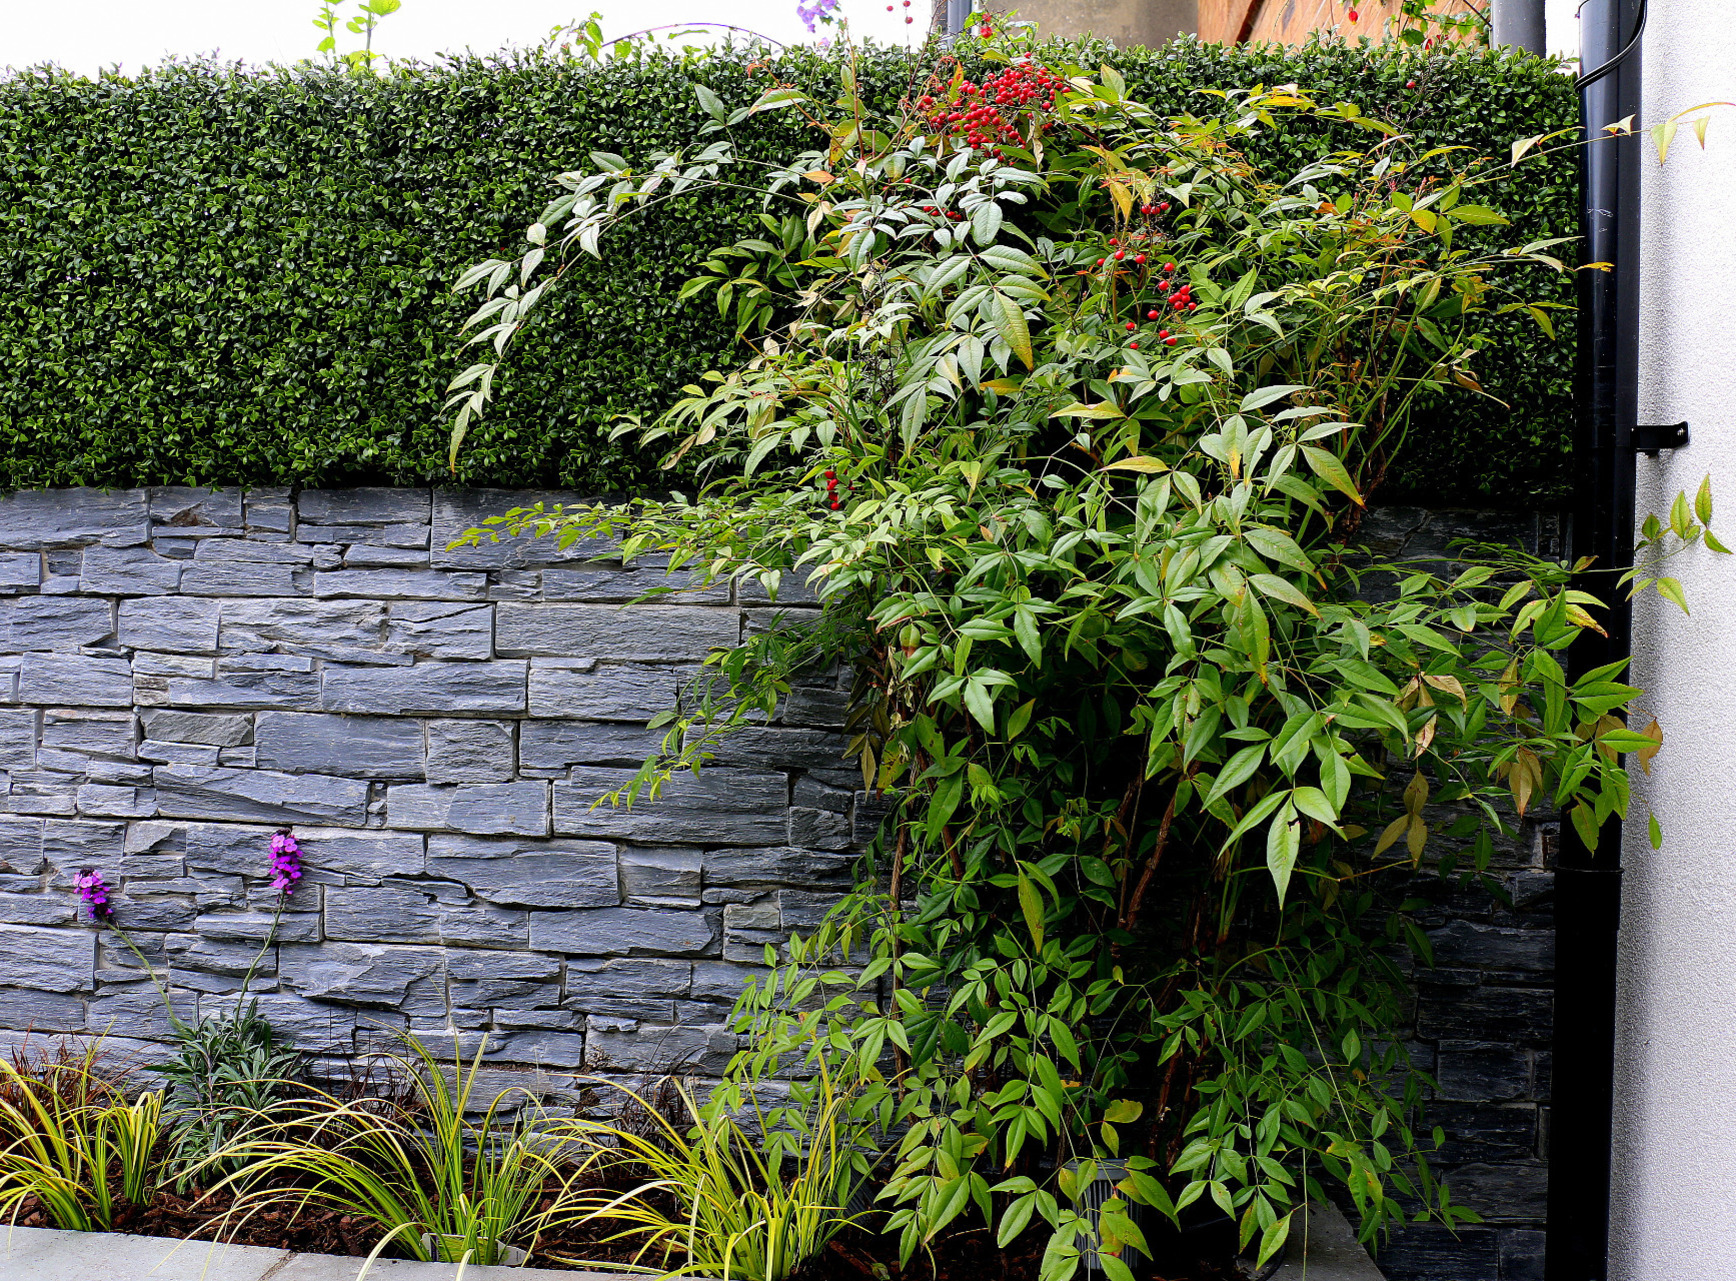 Striking textural contrasts of stone & boxwood cladding with natural specimen planting